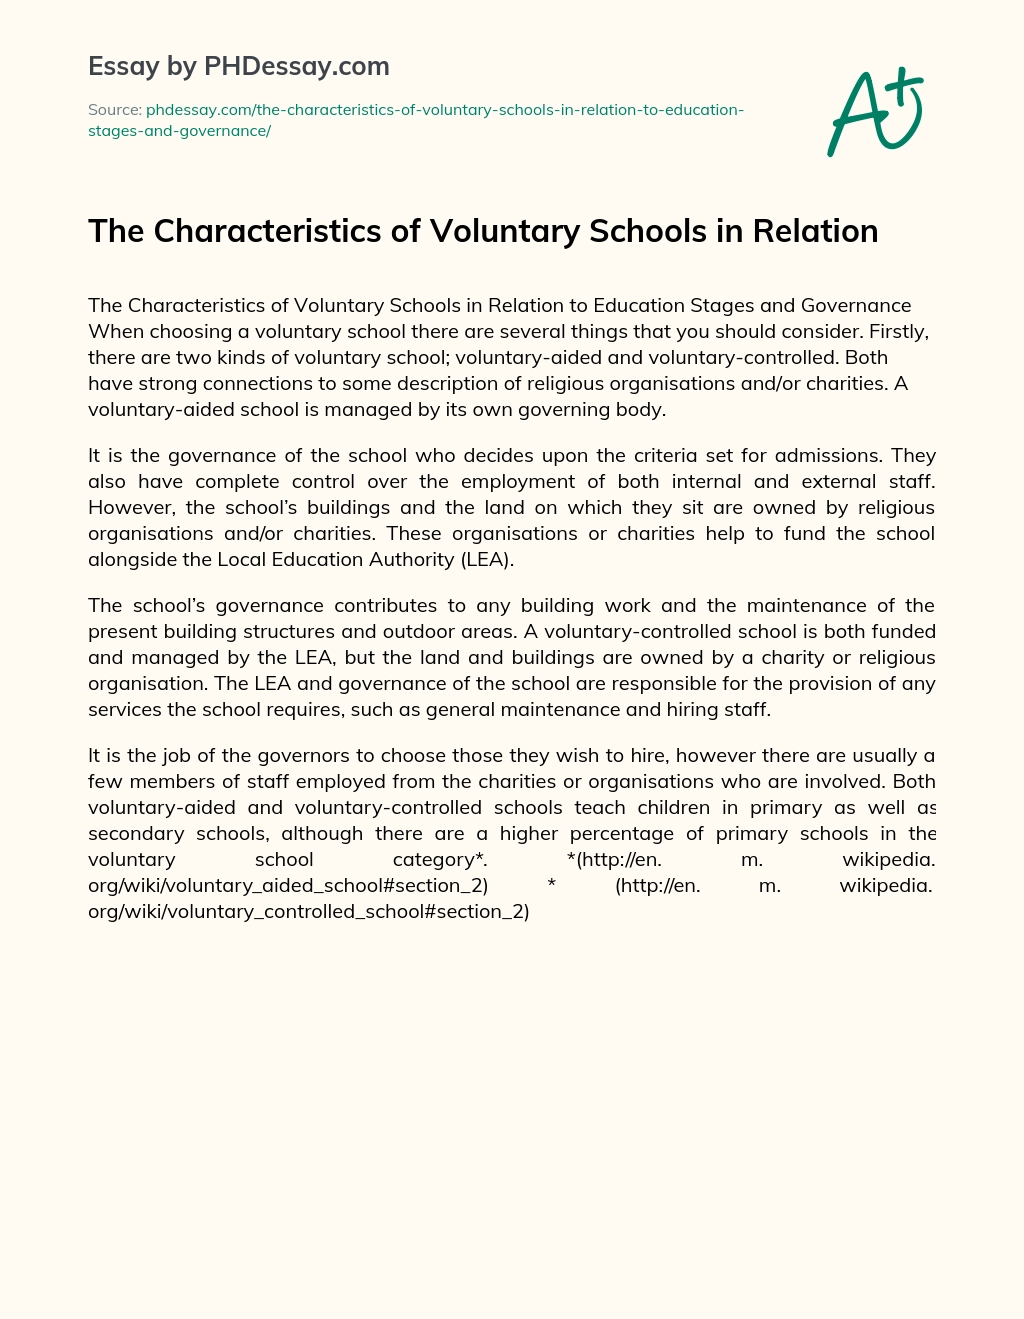 The Characteristics of Voluntary Schools in Relation essay